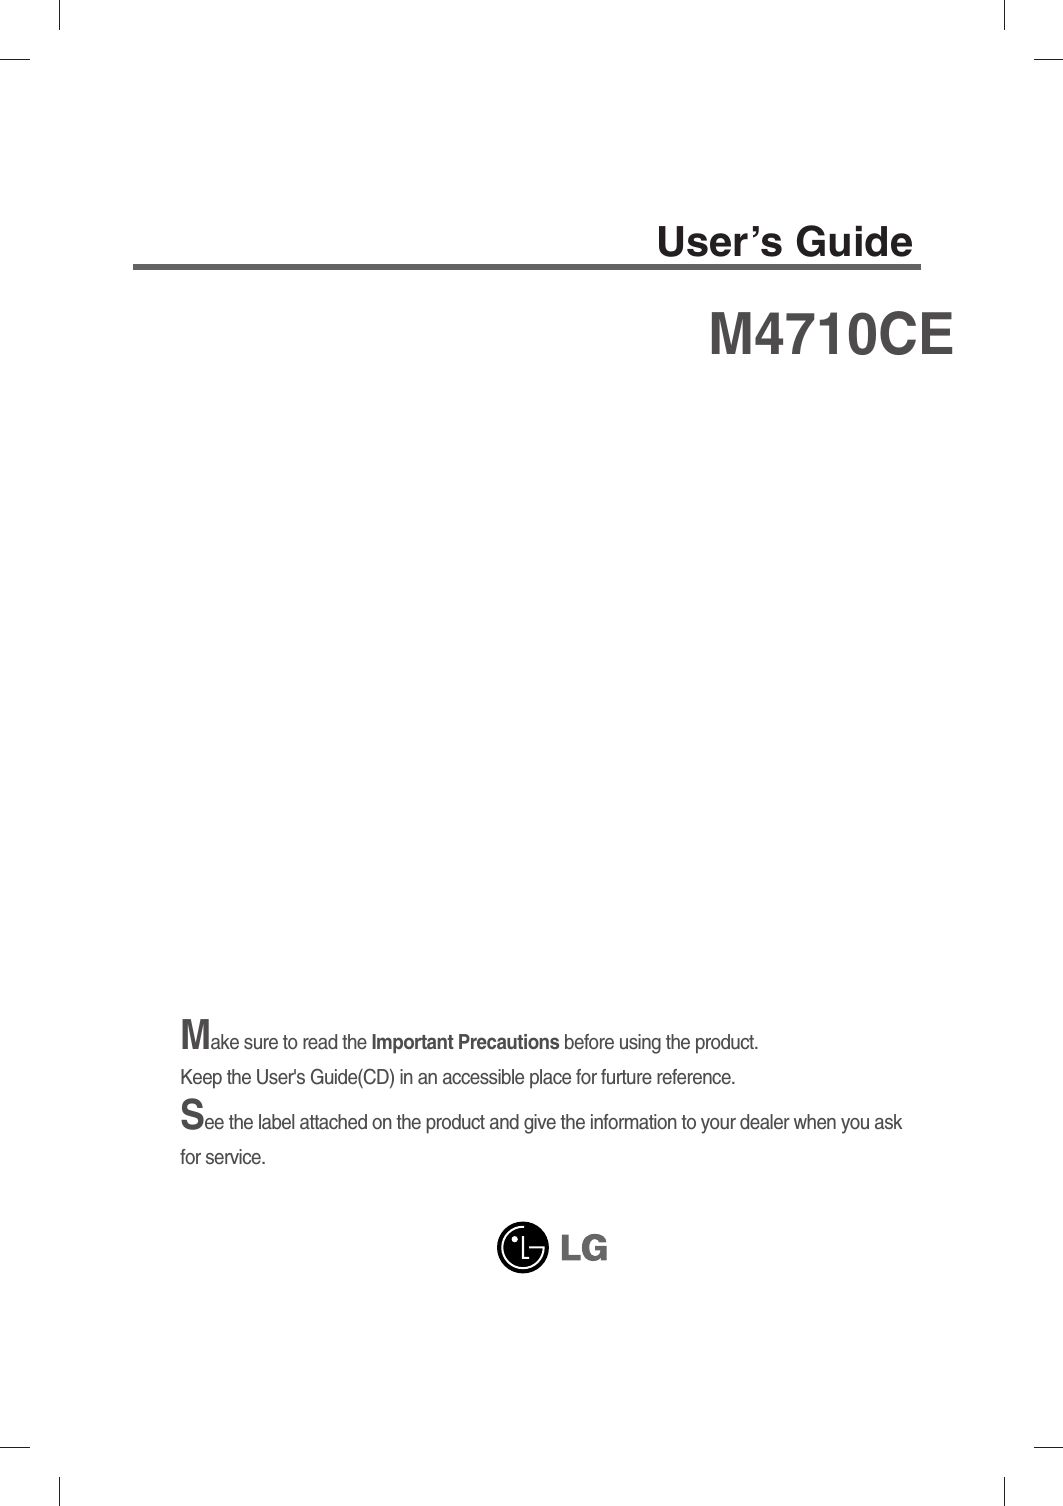 Make sure to read the Important Precautions before using the product. Keep the User&apos;s Guide(CD) in an accessible place for furture reference.See the label attached on the product and give the information to your dealer when you askfor service.M4710CEUser’s Guide